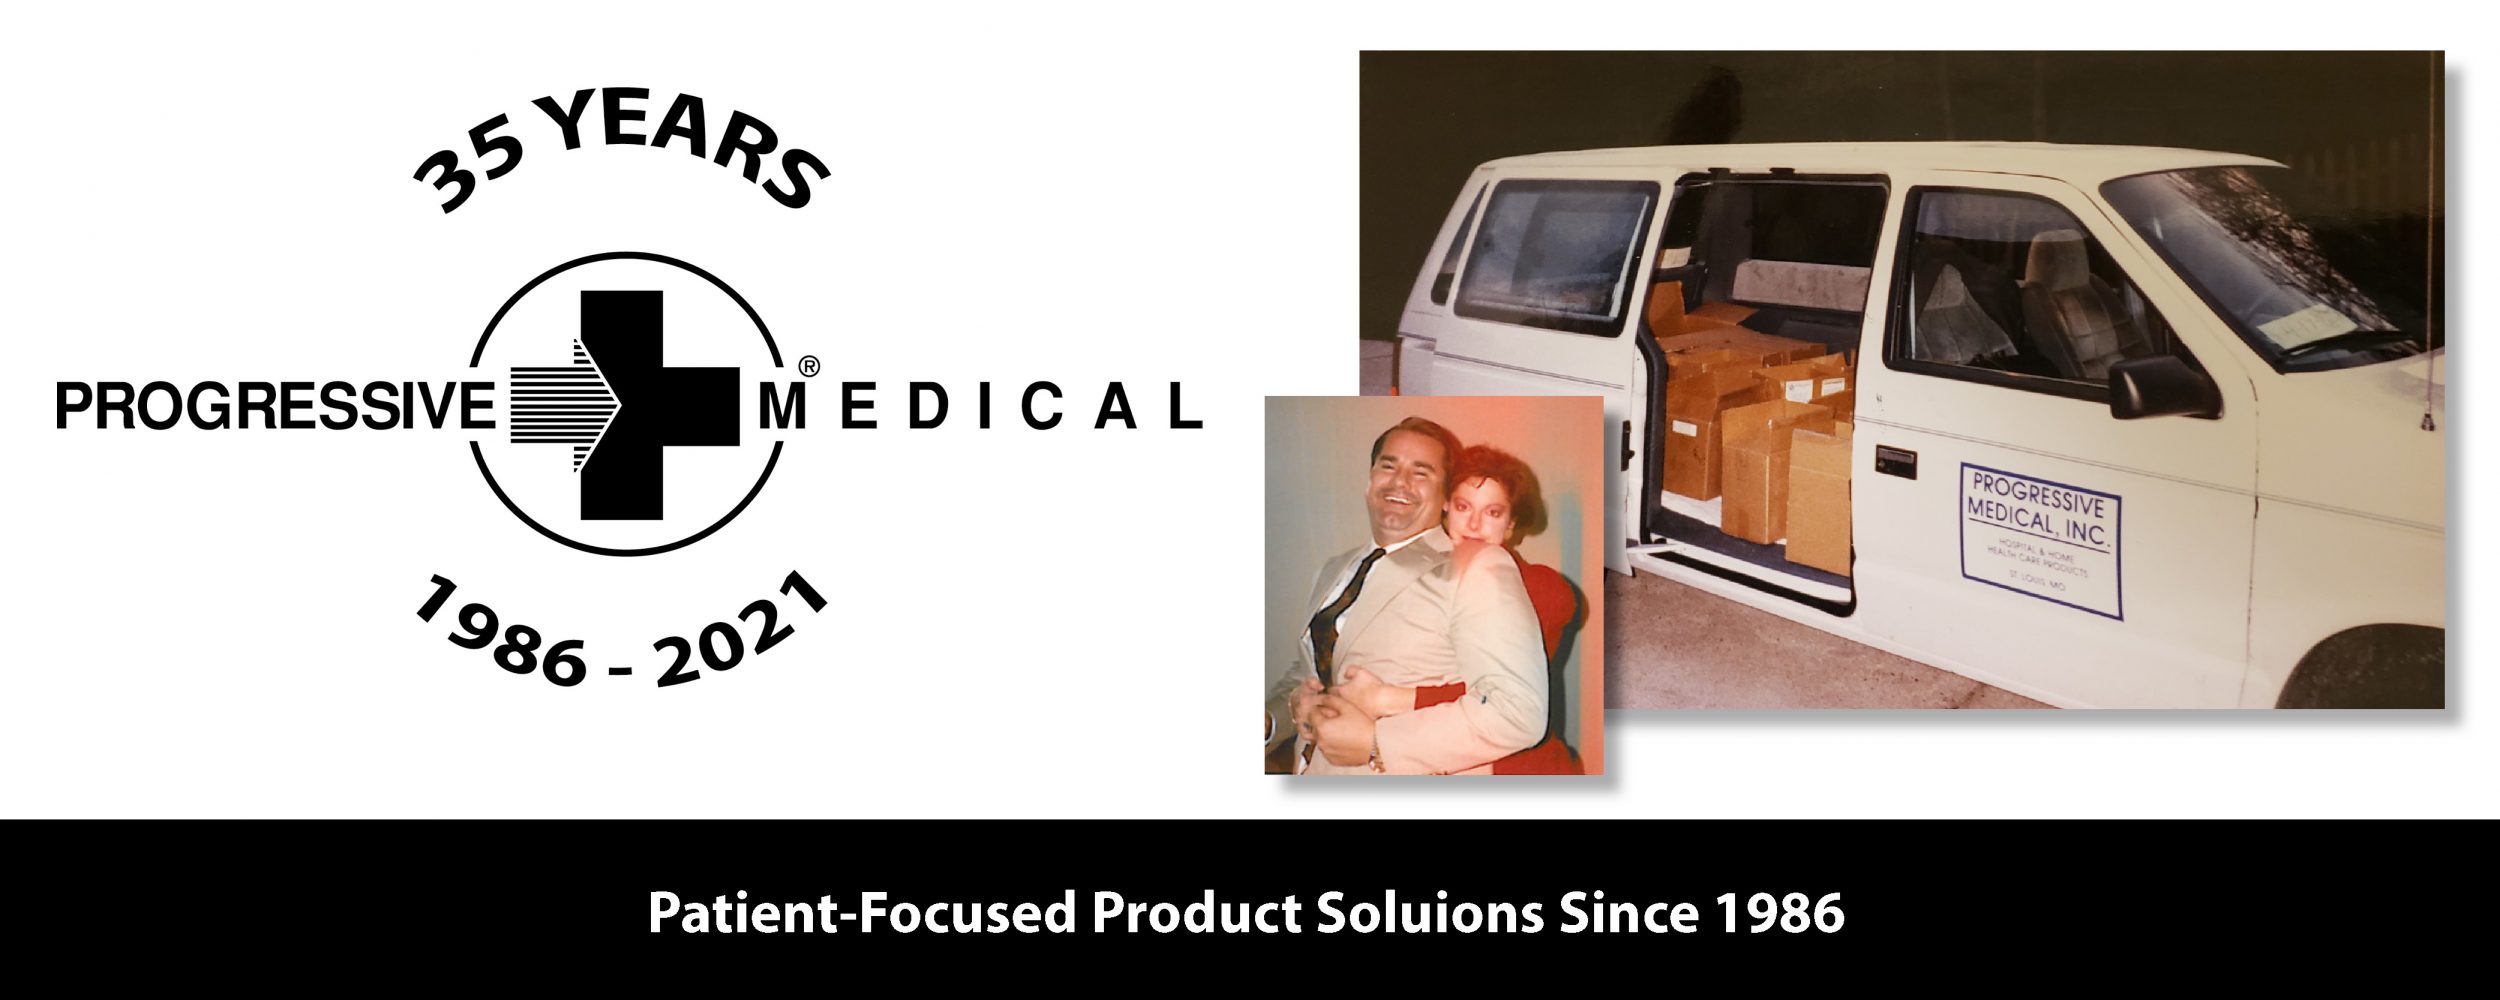 national specialty medical device distributor